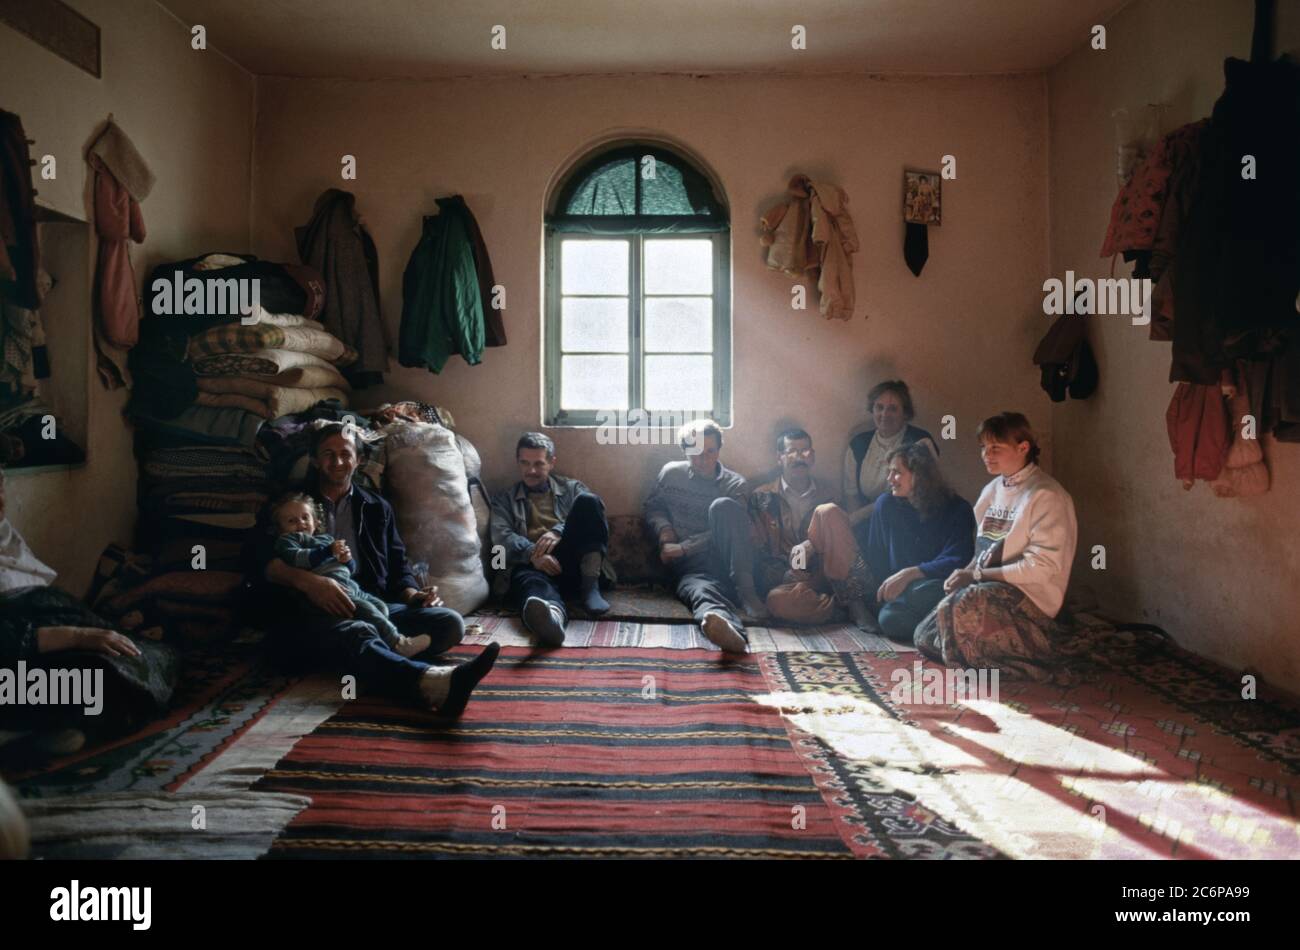 13th March 1994 During the war in Bosnia: displaced Bosnian Muslims share a room inside the village of Rotilj, where everyone is under detention by the Bosnian Croats. Stock Photo